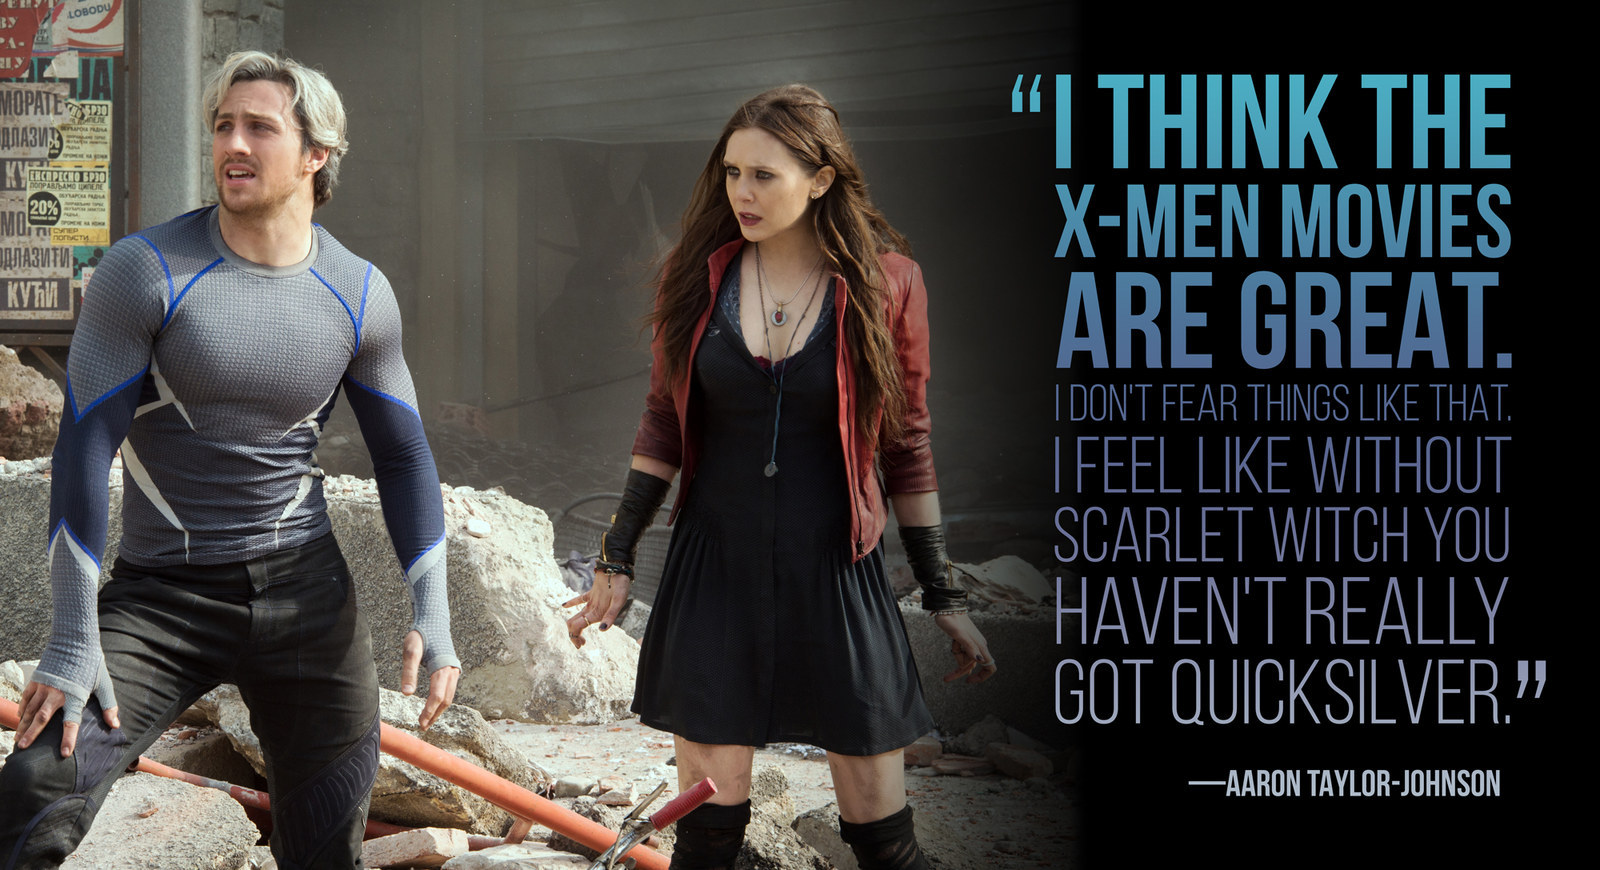 Scarlet Witch and Quicksilver Confirmed for Avengers 2